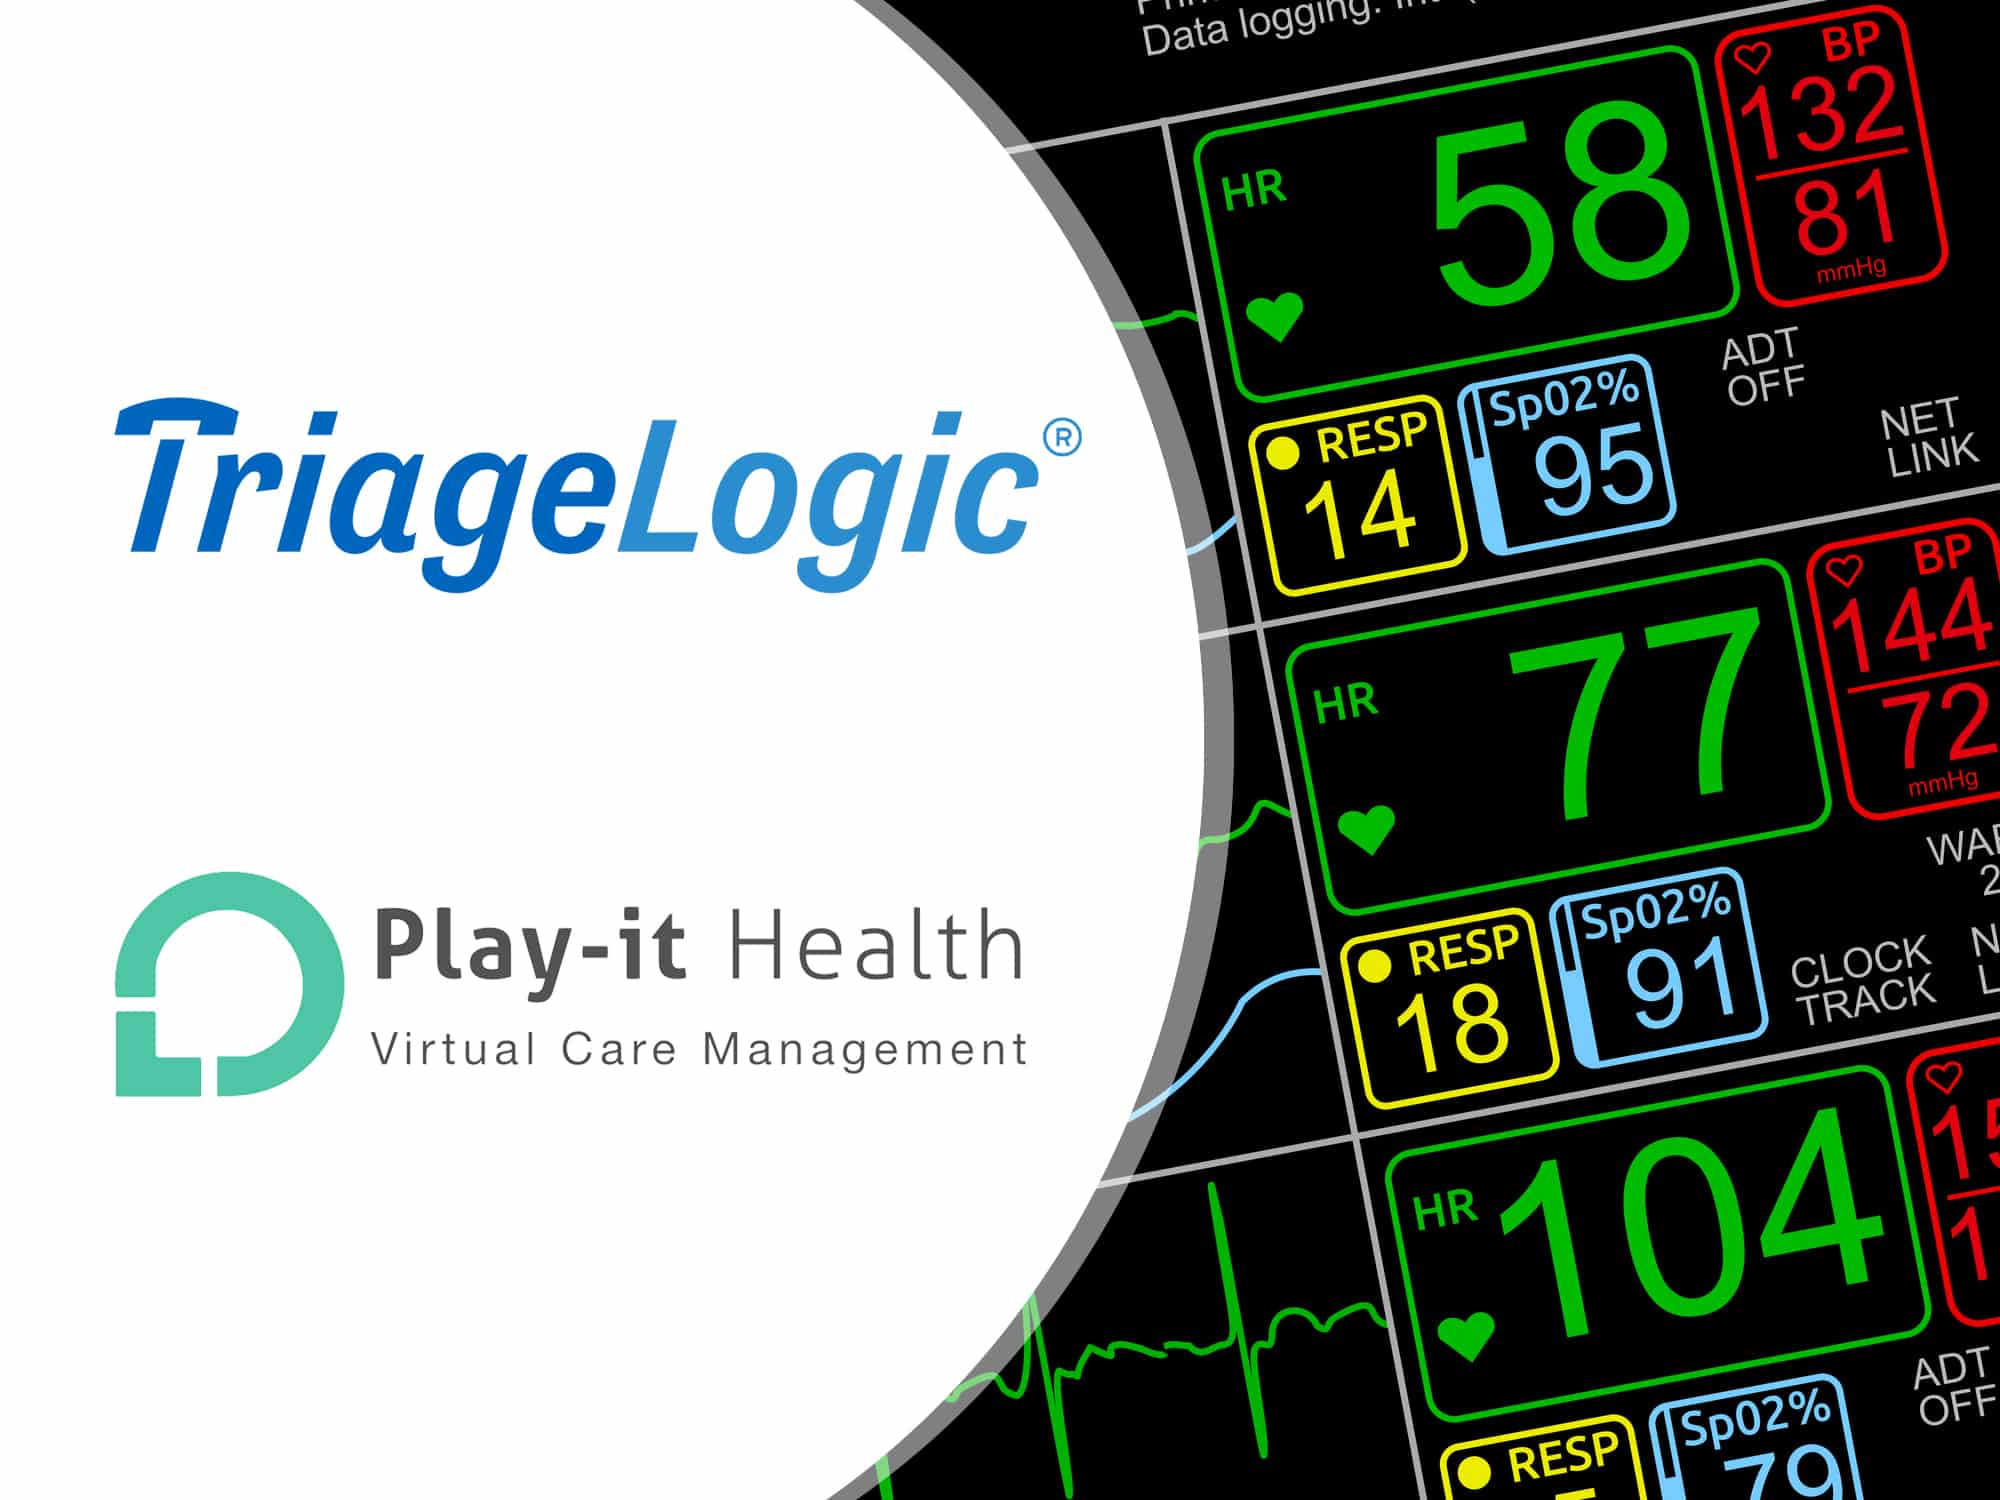 You are currently viewing Press Release: Play-it Health Partners with TriageLogic on Remote Patient Monitoring (RPM)